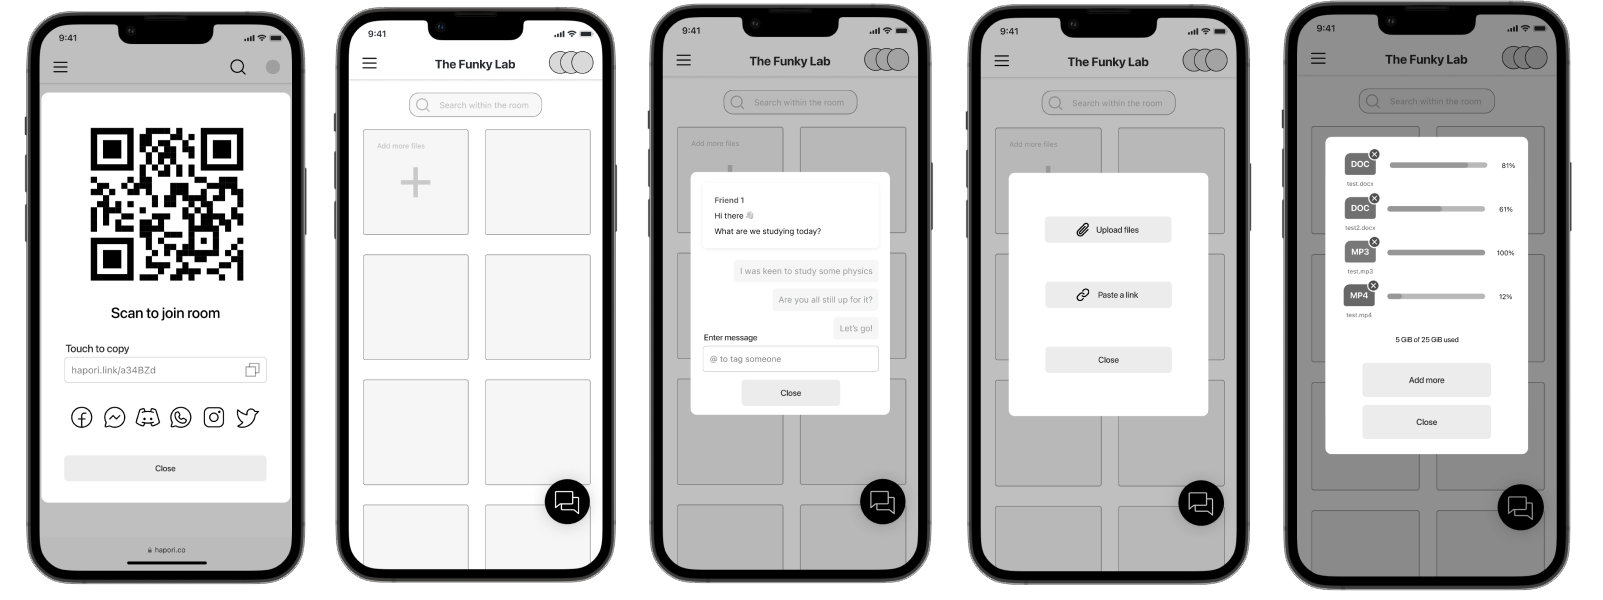 Userflow shown as a mid fidelity wireframe.